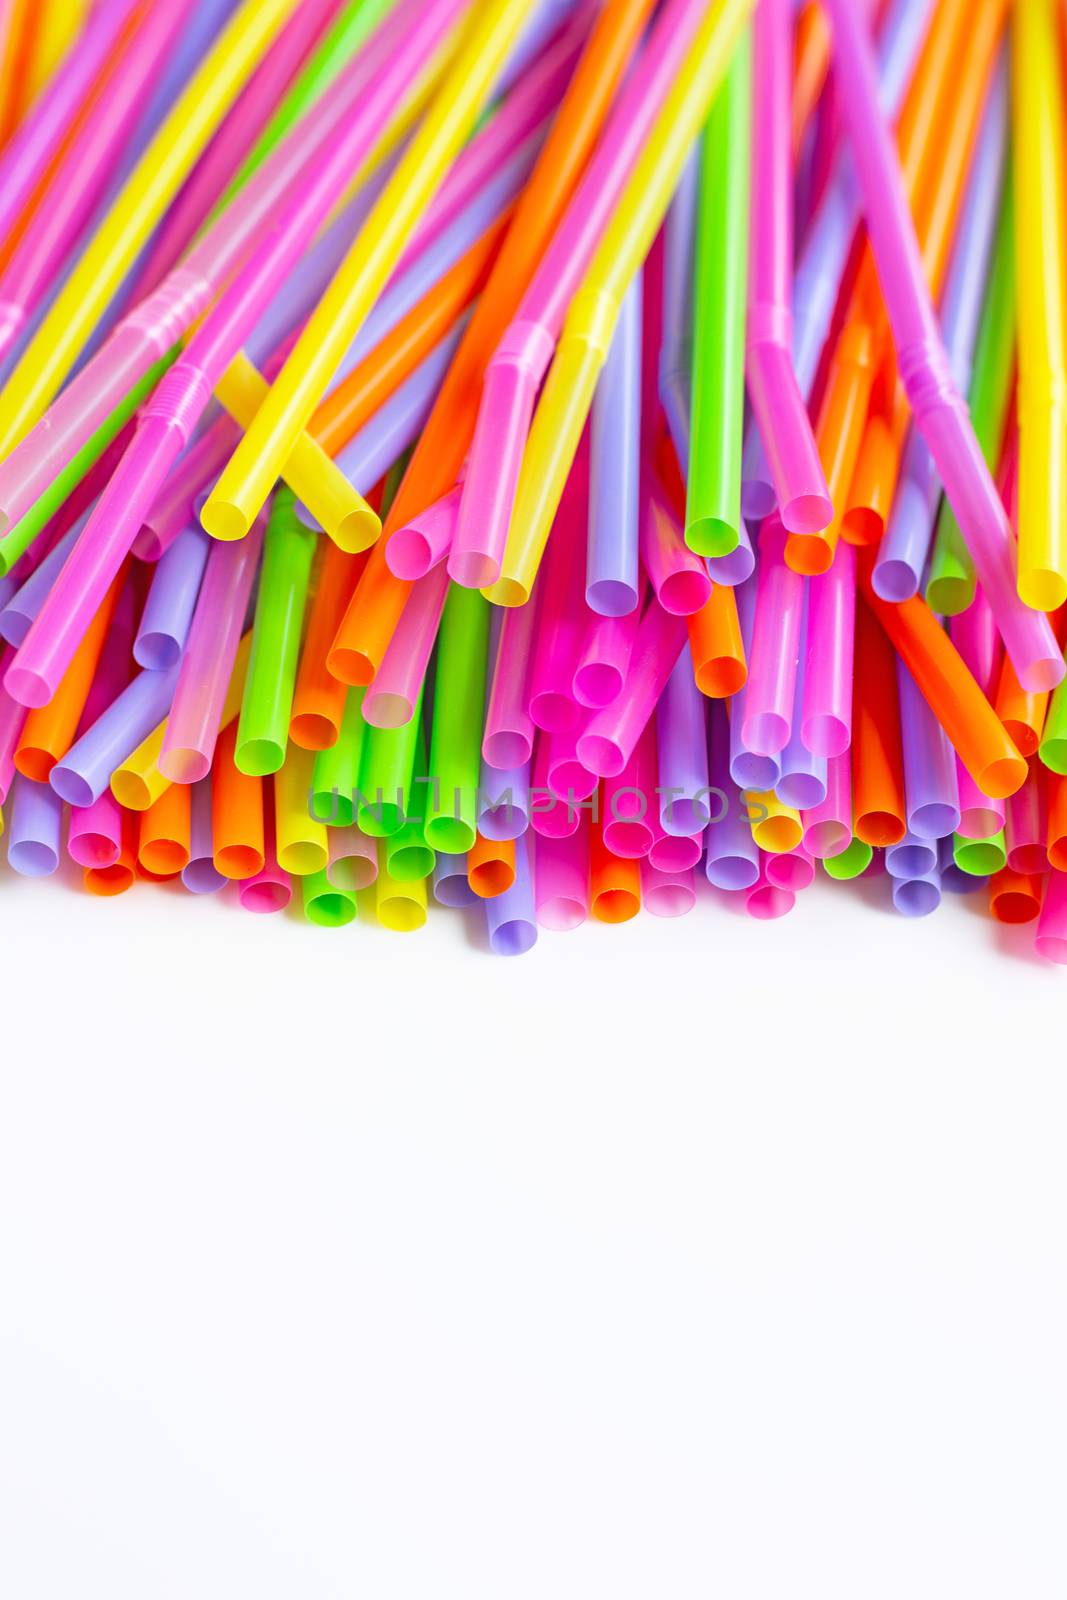 Colorful plastic  straws on white background. by Bowonpat